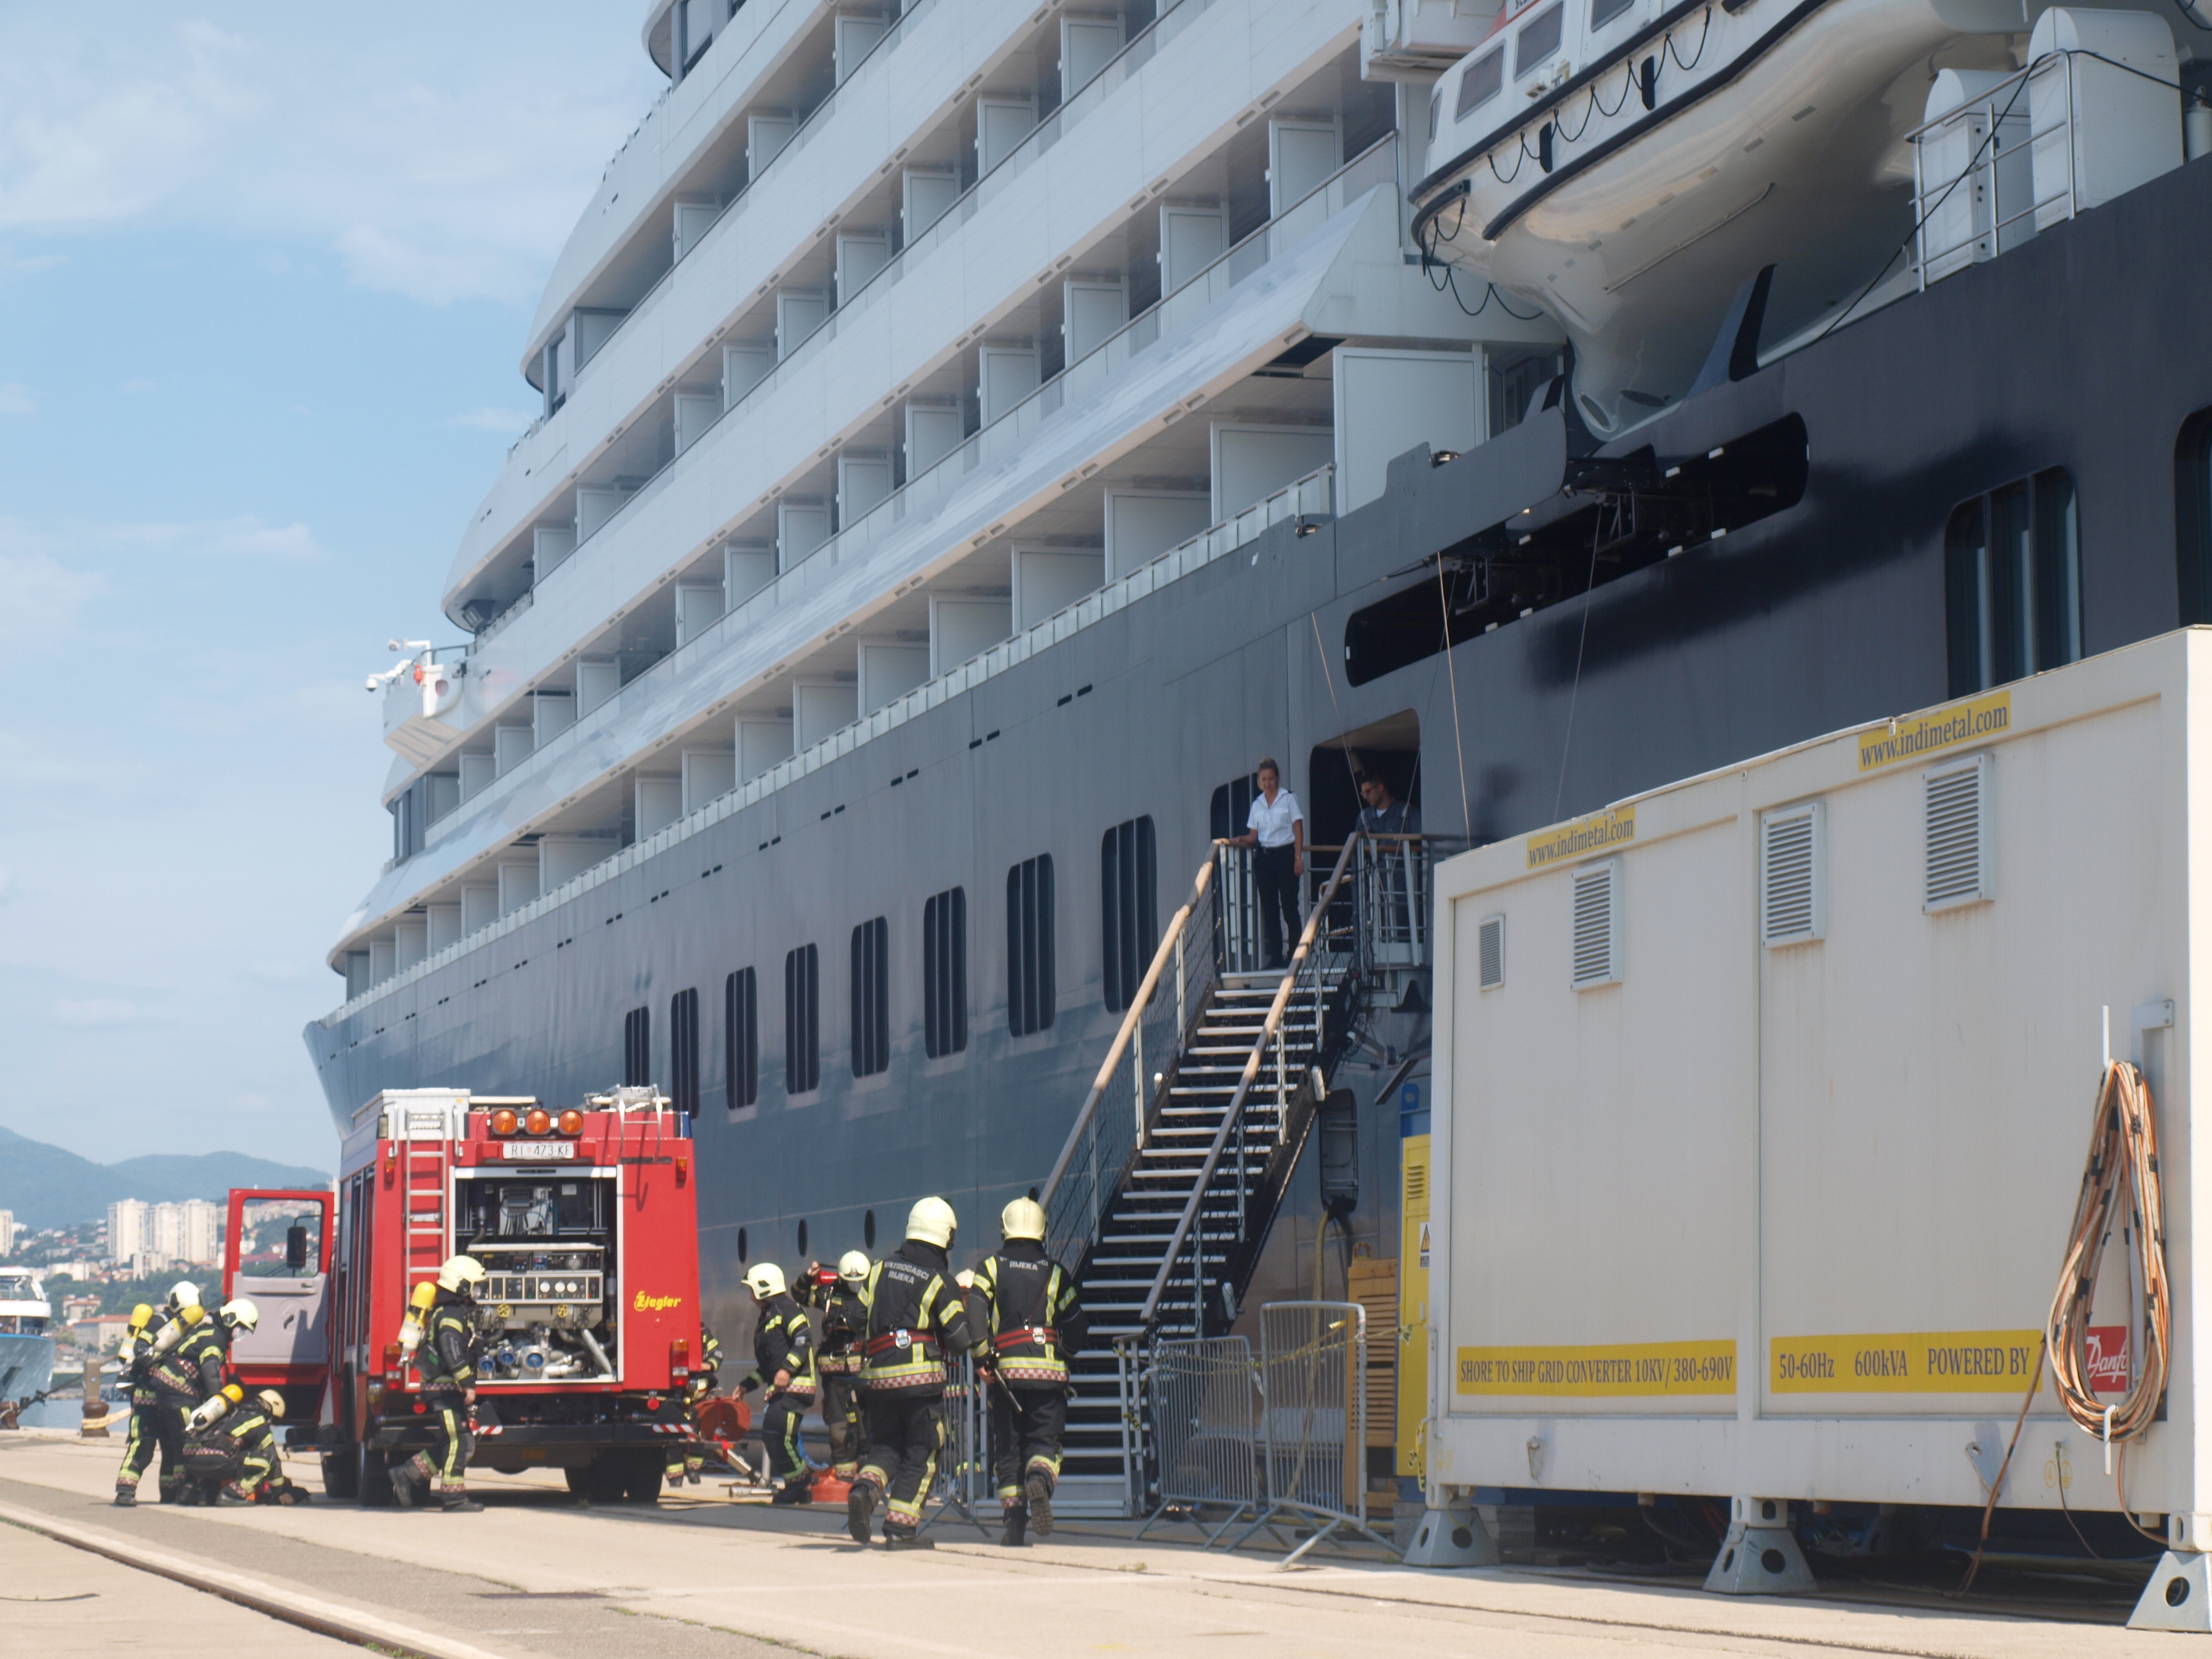 Simulated tactical fire control exercise at the polar cruiser Scenic Eclipse